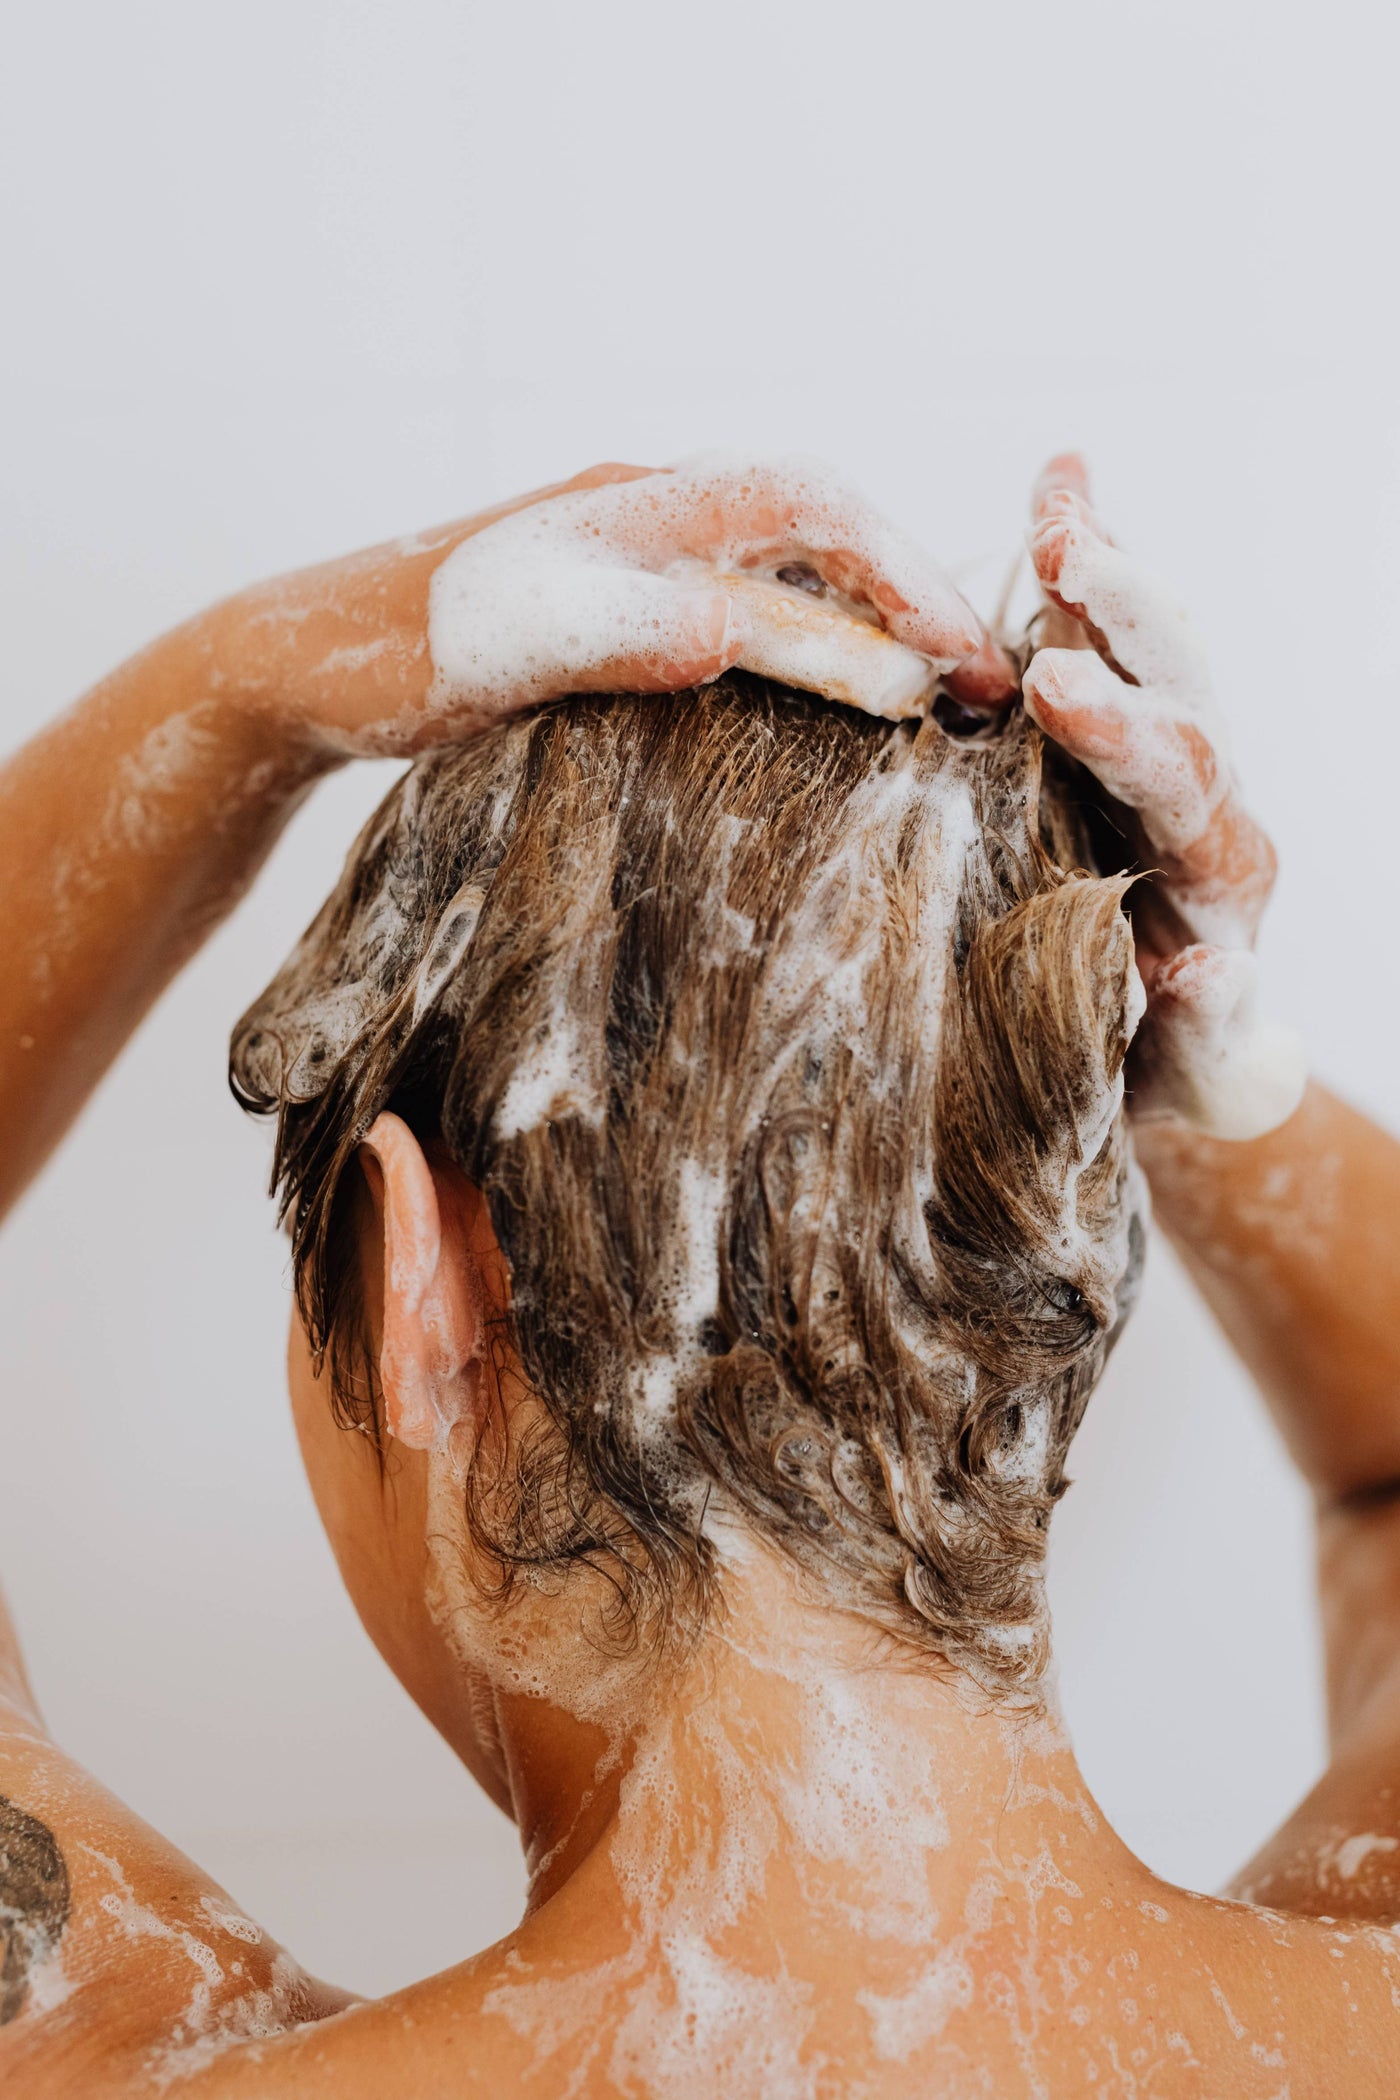 A Quick Secret About Washing Hair